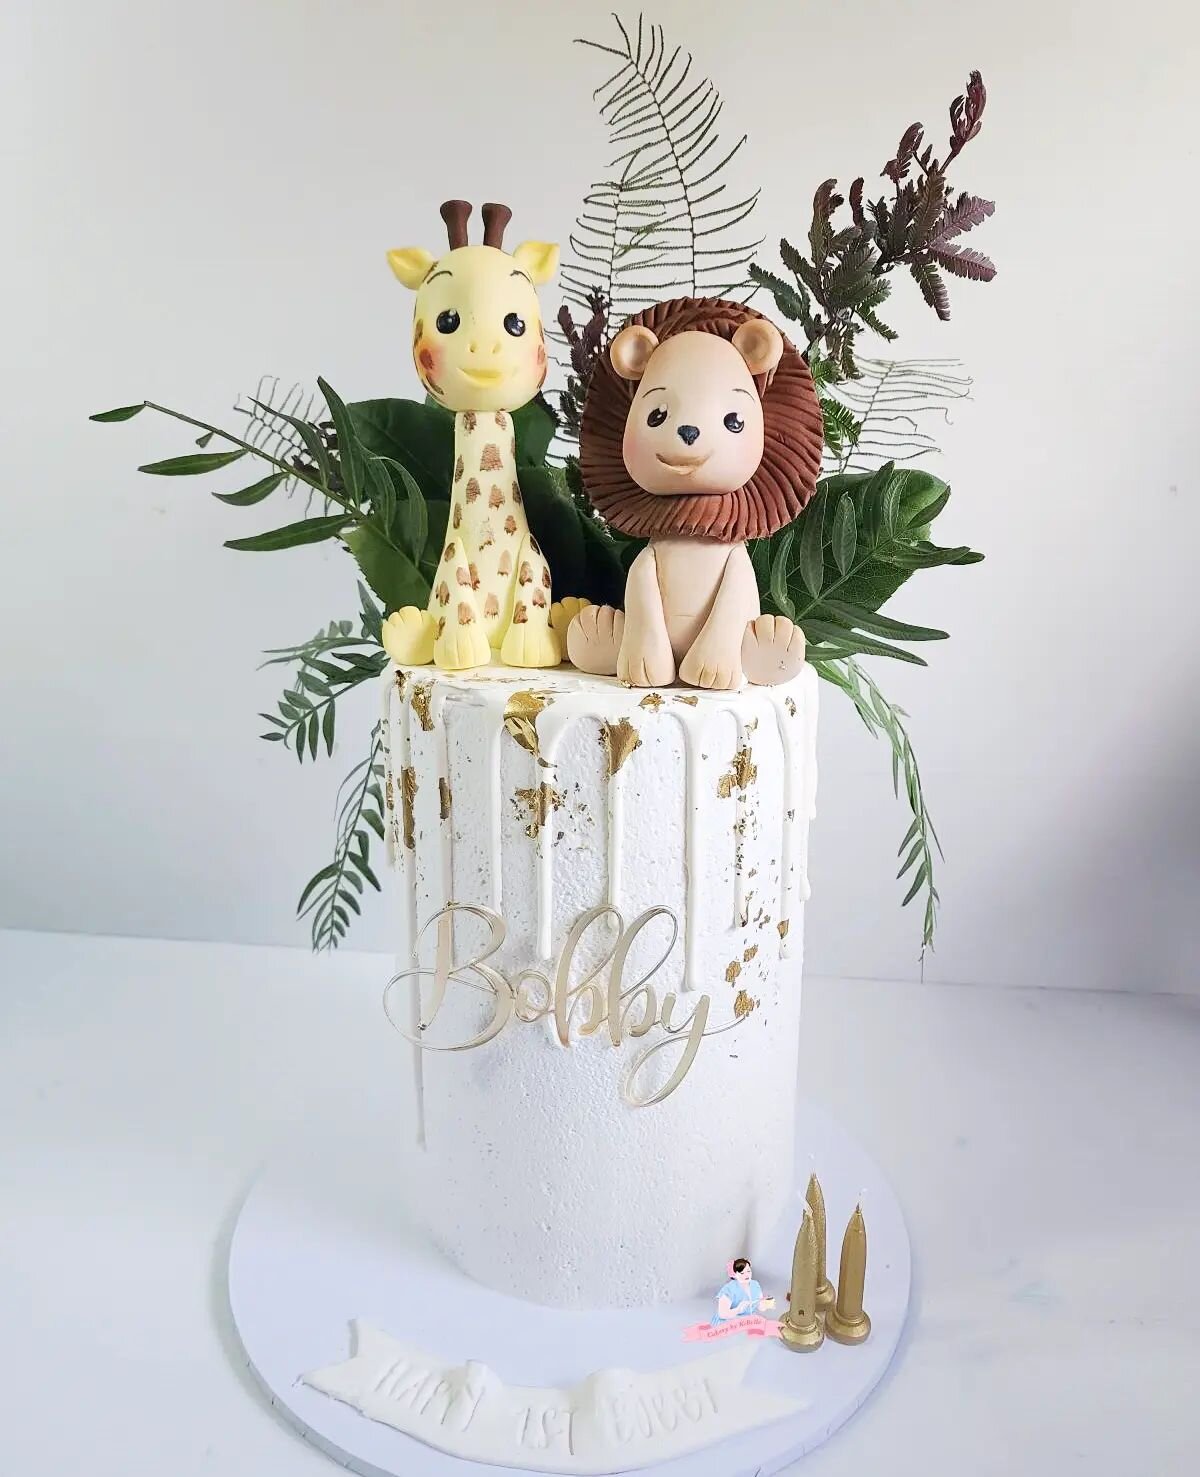 The monochrome drip/finish design is so stylish and becoming a very popular order!

Acrylic front topper by @pretty_fix_creative
Fauna by @verdaflore

#cakerybykbelle #jungleanimalcake #animalcake #jungleanimals #safaricake #safarianimalcake #junglec